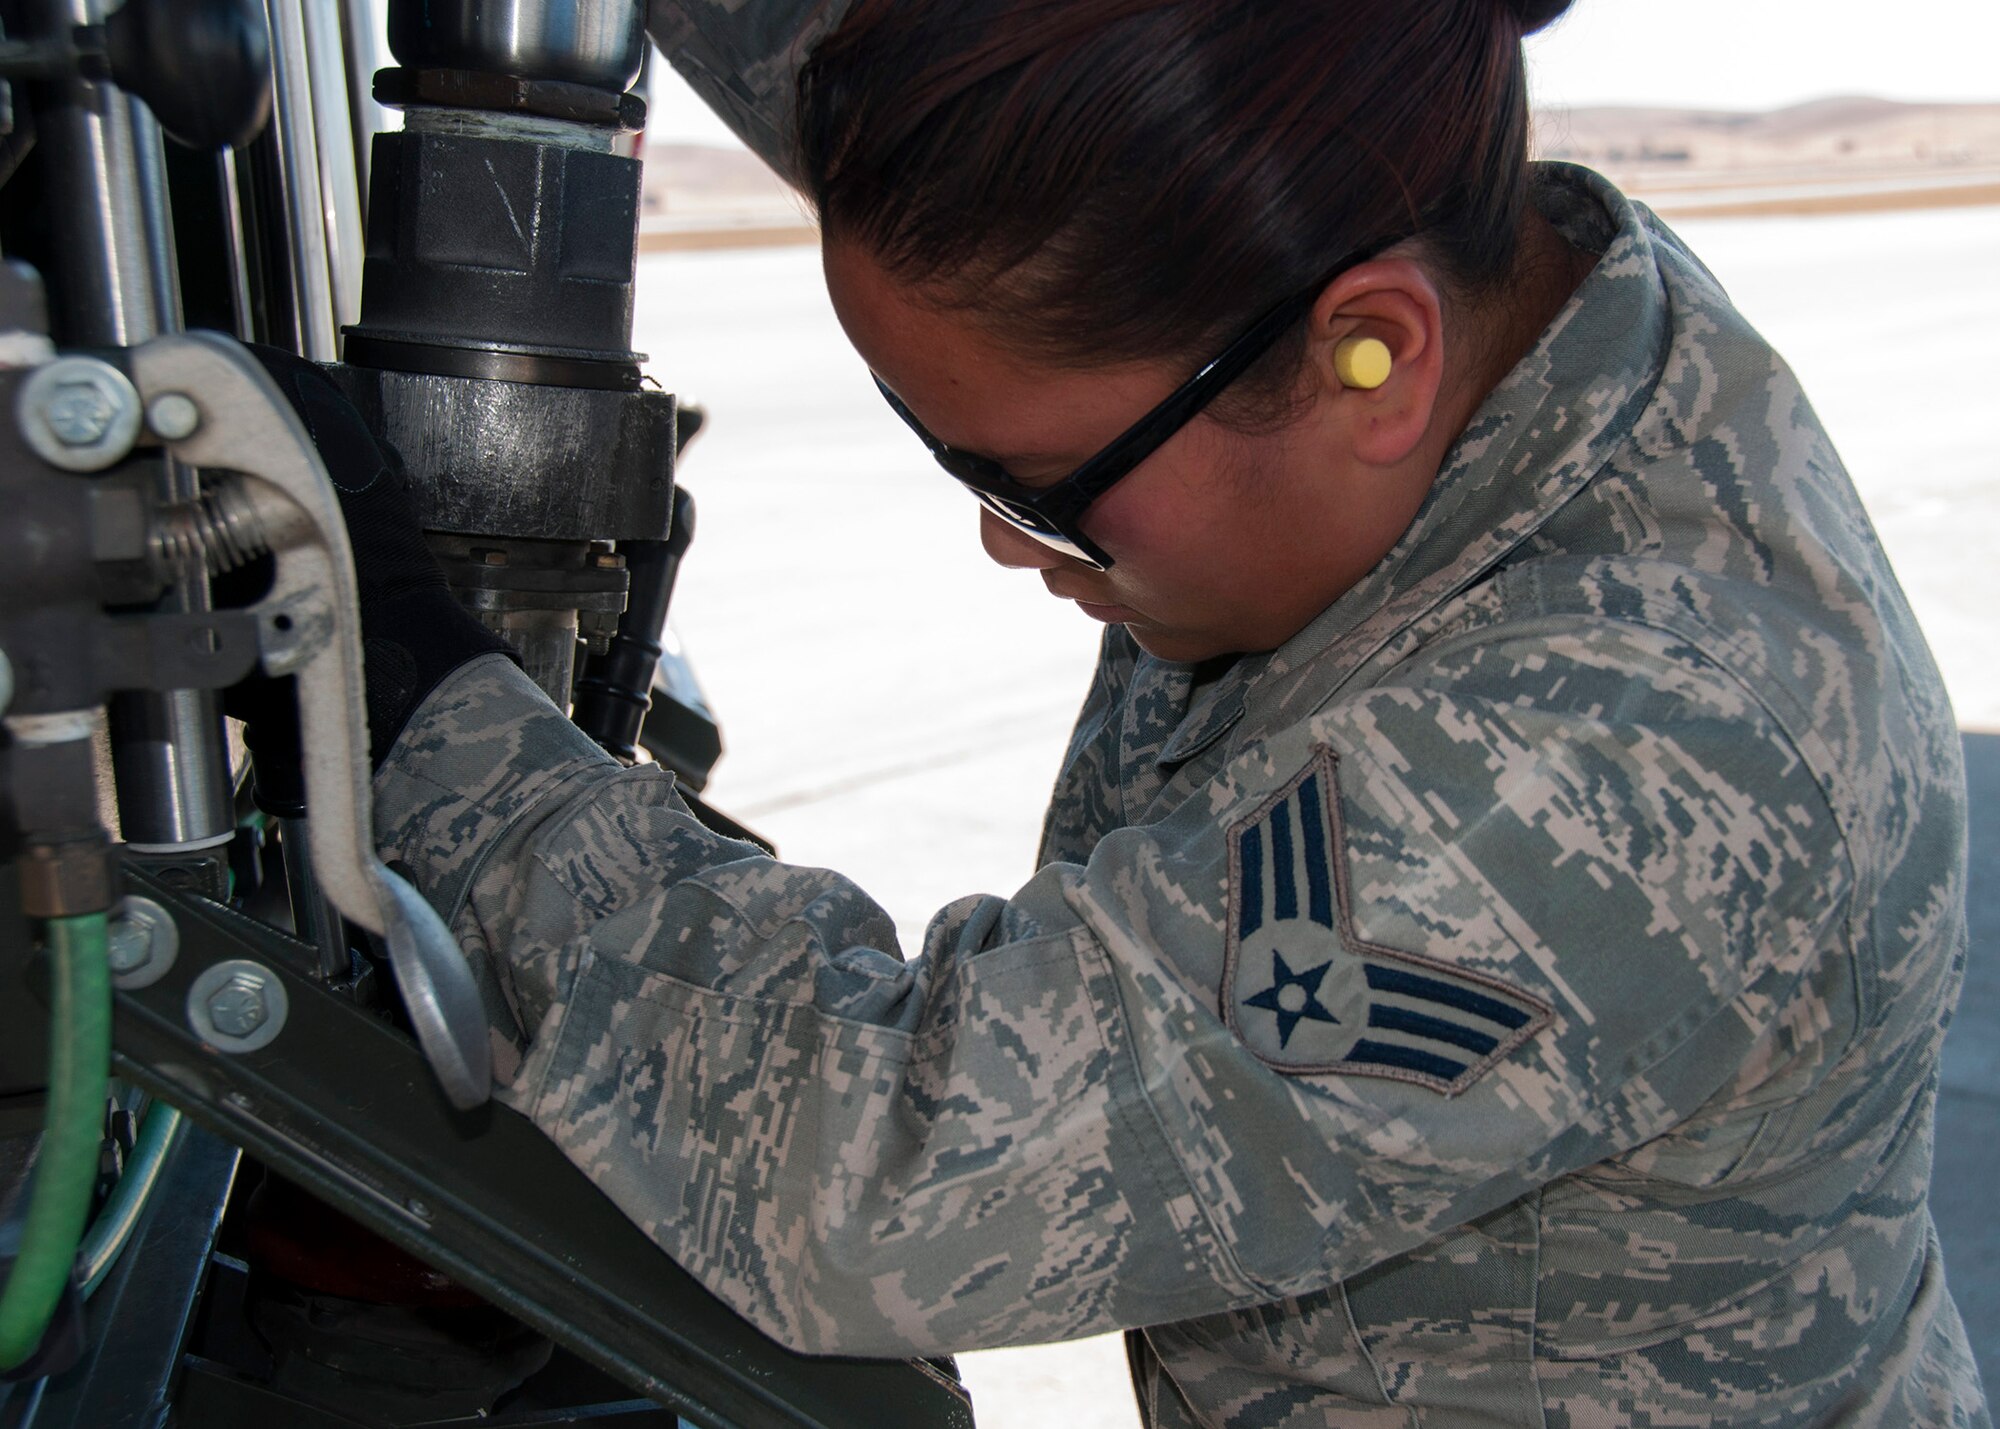 TRAVIS AIR FORCE BASE, Calif. --  Senior Airman Erika Reyrao, 349th Logistics Readiness Squadron, fuels a C-17  Globemaster and receives an important afsc skills certification on Sept. 7, 2013 at Travis Air Force Base, Calif.The 349th Air Mobility Wing's weekend-long specialty skills training event engaged more than 500 Reserve Airmen in hands-on training in the wing's core missions of moving passengers and cargo, generating sorties, flying aircraft, defending the base and providing high-quality medical care. This cost-saving training event fostered communication between units and enhanced esprit de corps. (U.S. Air Force photo/ Senior Airmen Amelia Leonard)